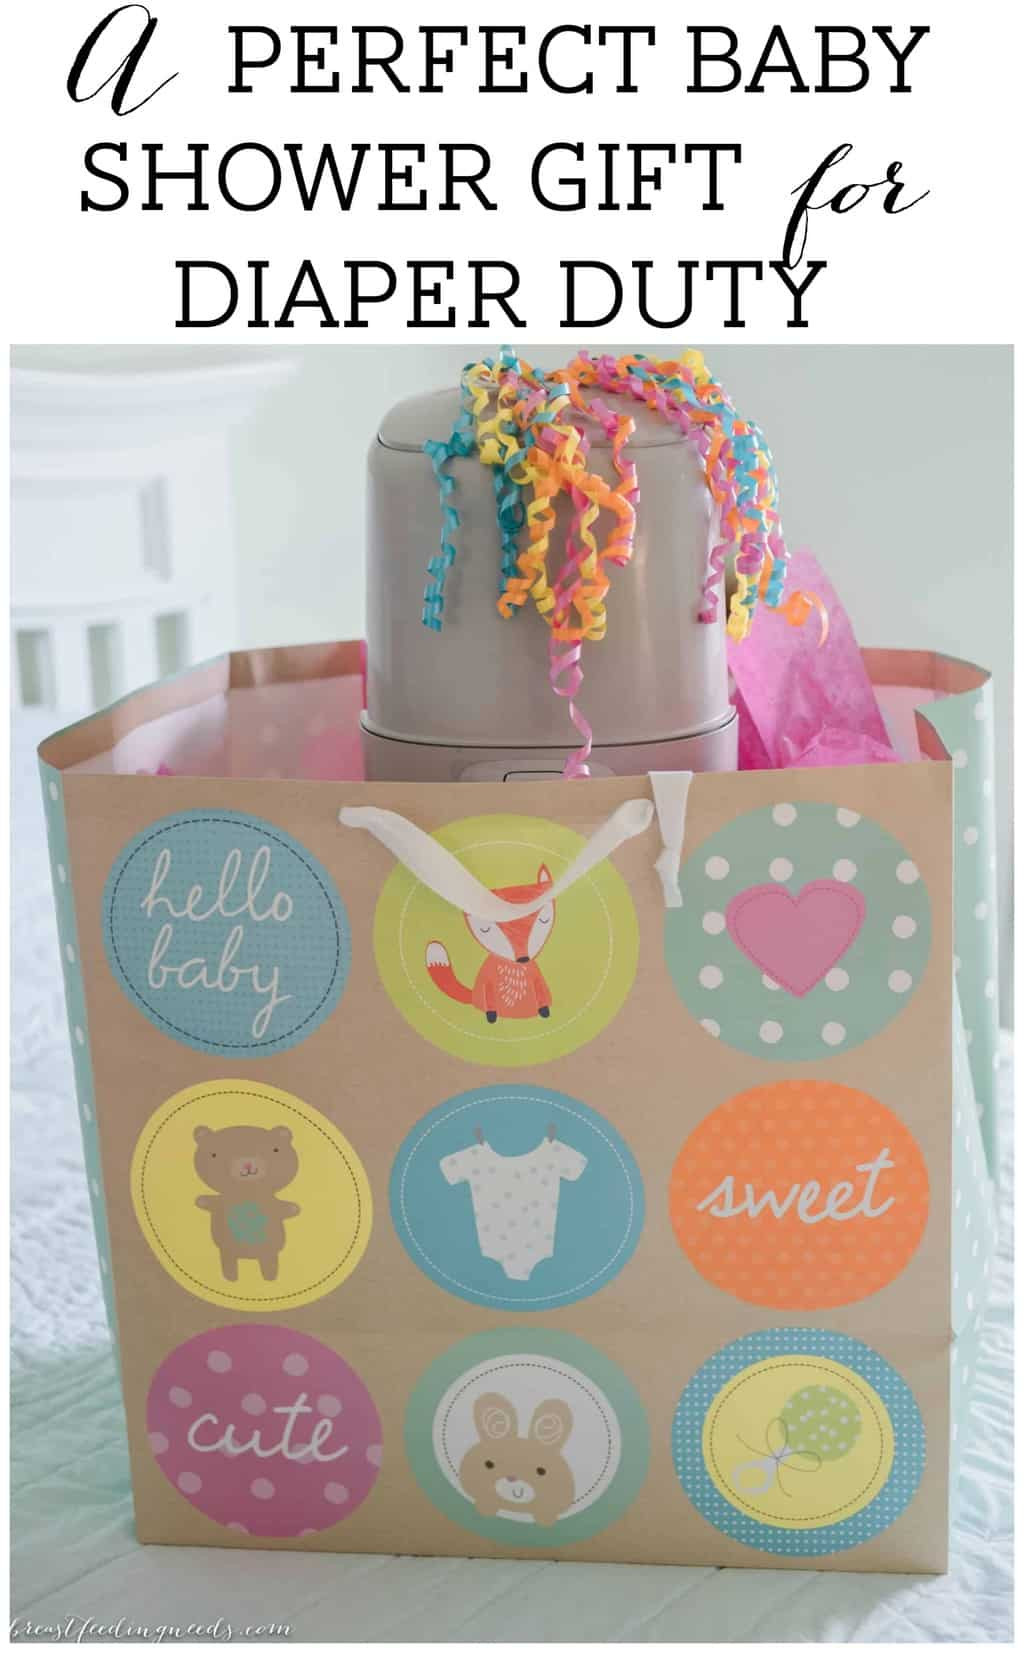 Perfect Gift For Baby Shower
 A Perfect Baby Shower Gift for Diaper Duty Breastfeeding